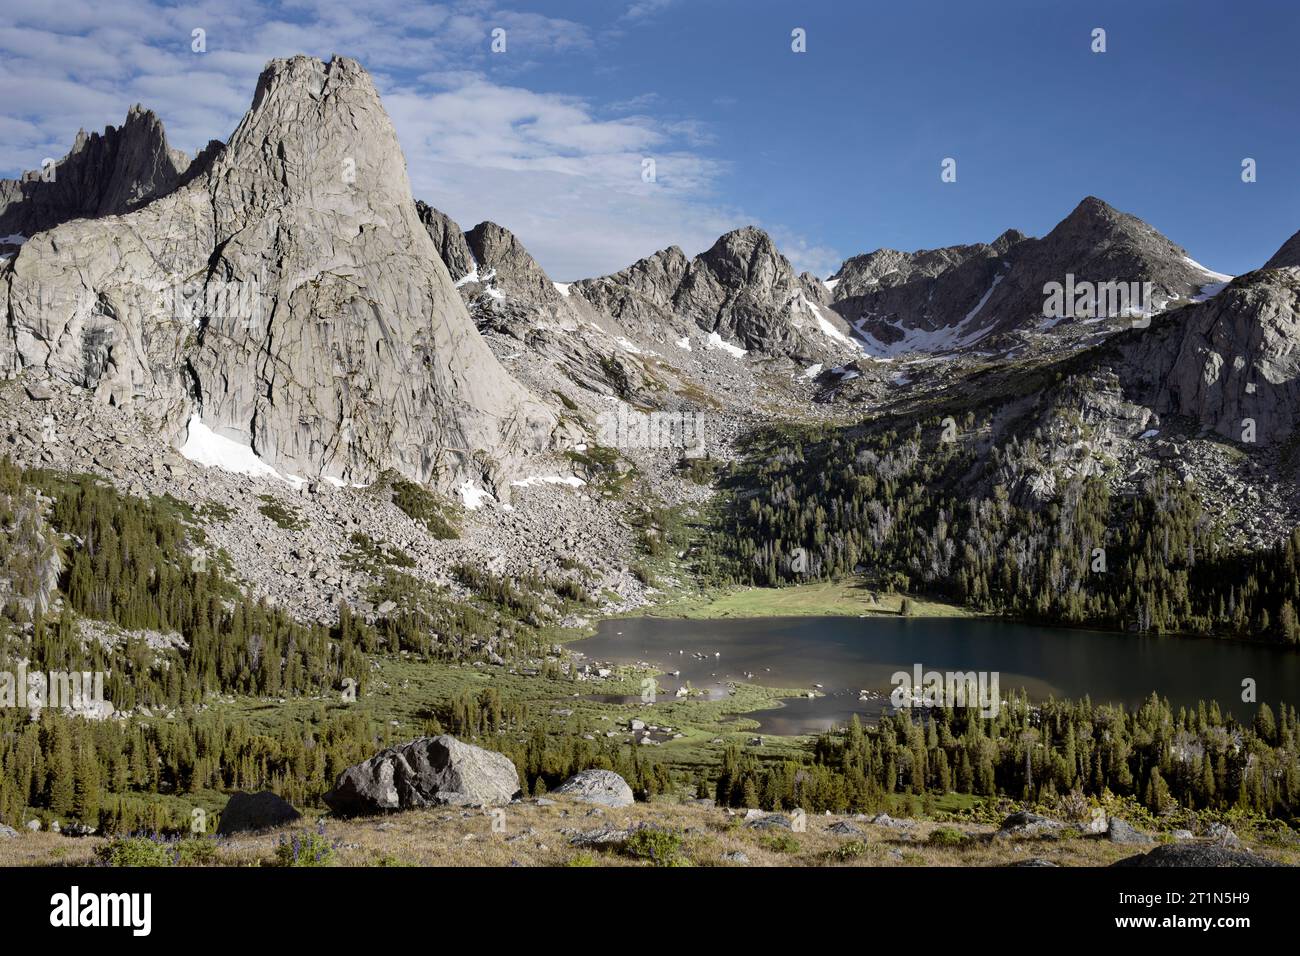 WY05451-00....WYOMING - Cirque of the Towers und Lonesome Lake bilden Jackass Pass, Popo Agie Wilderness, Shoshone National Forest. Stockfoto